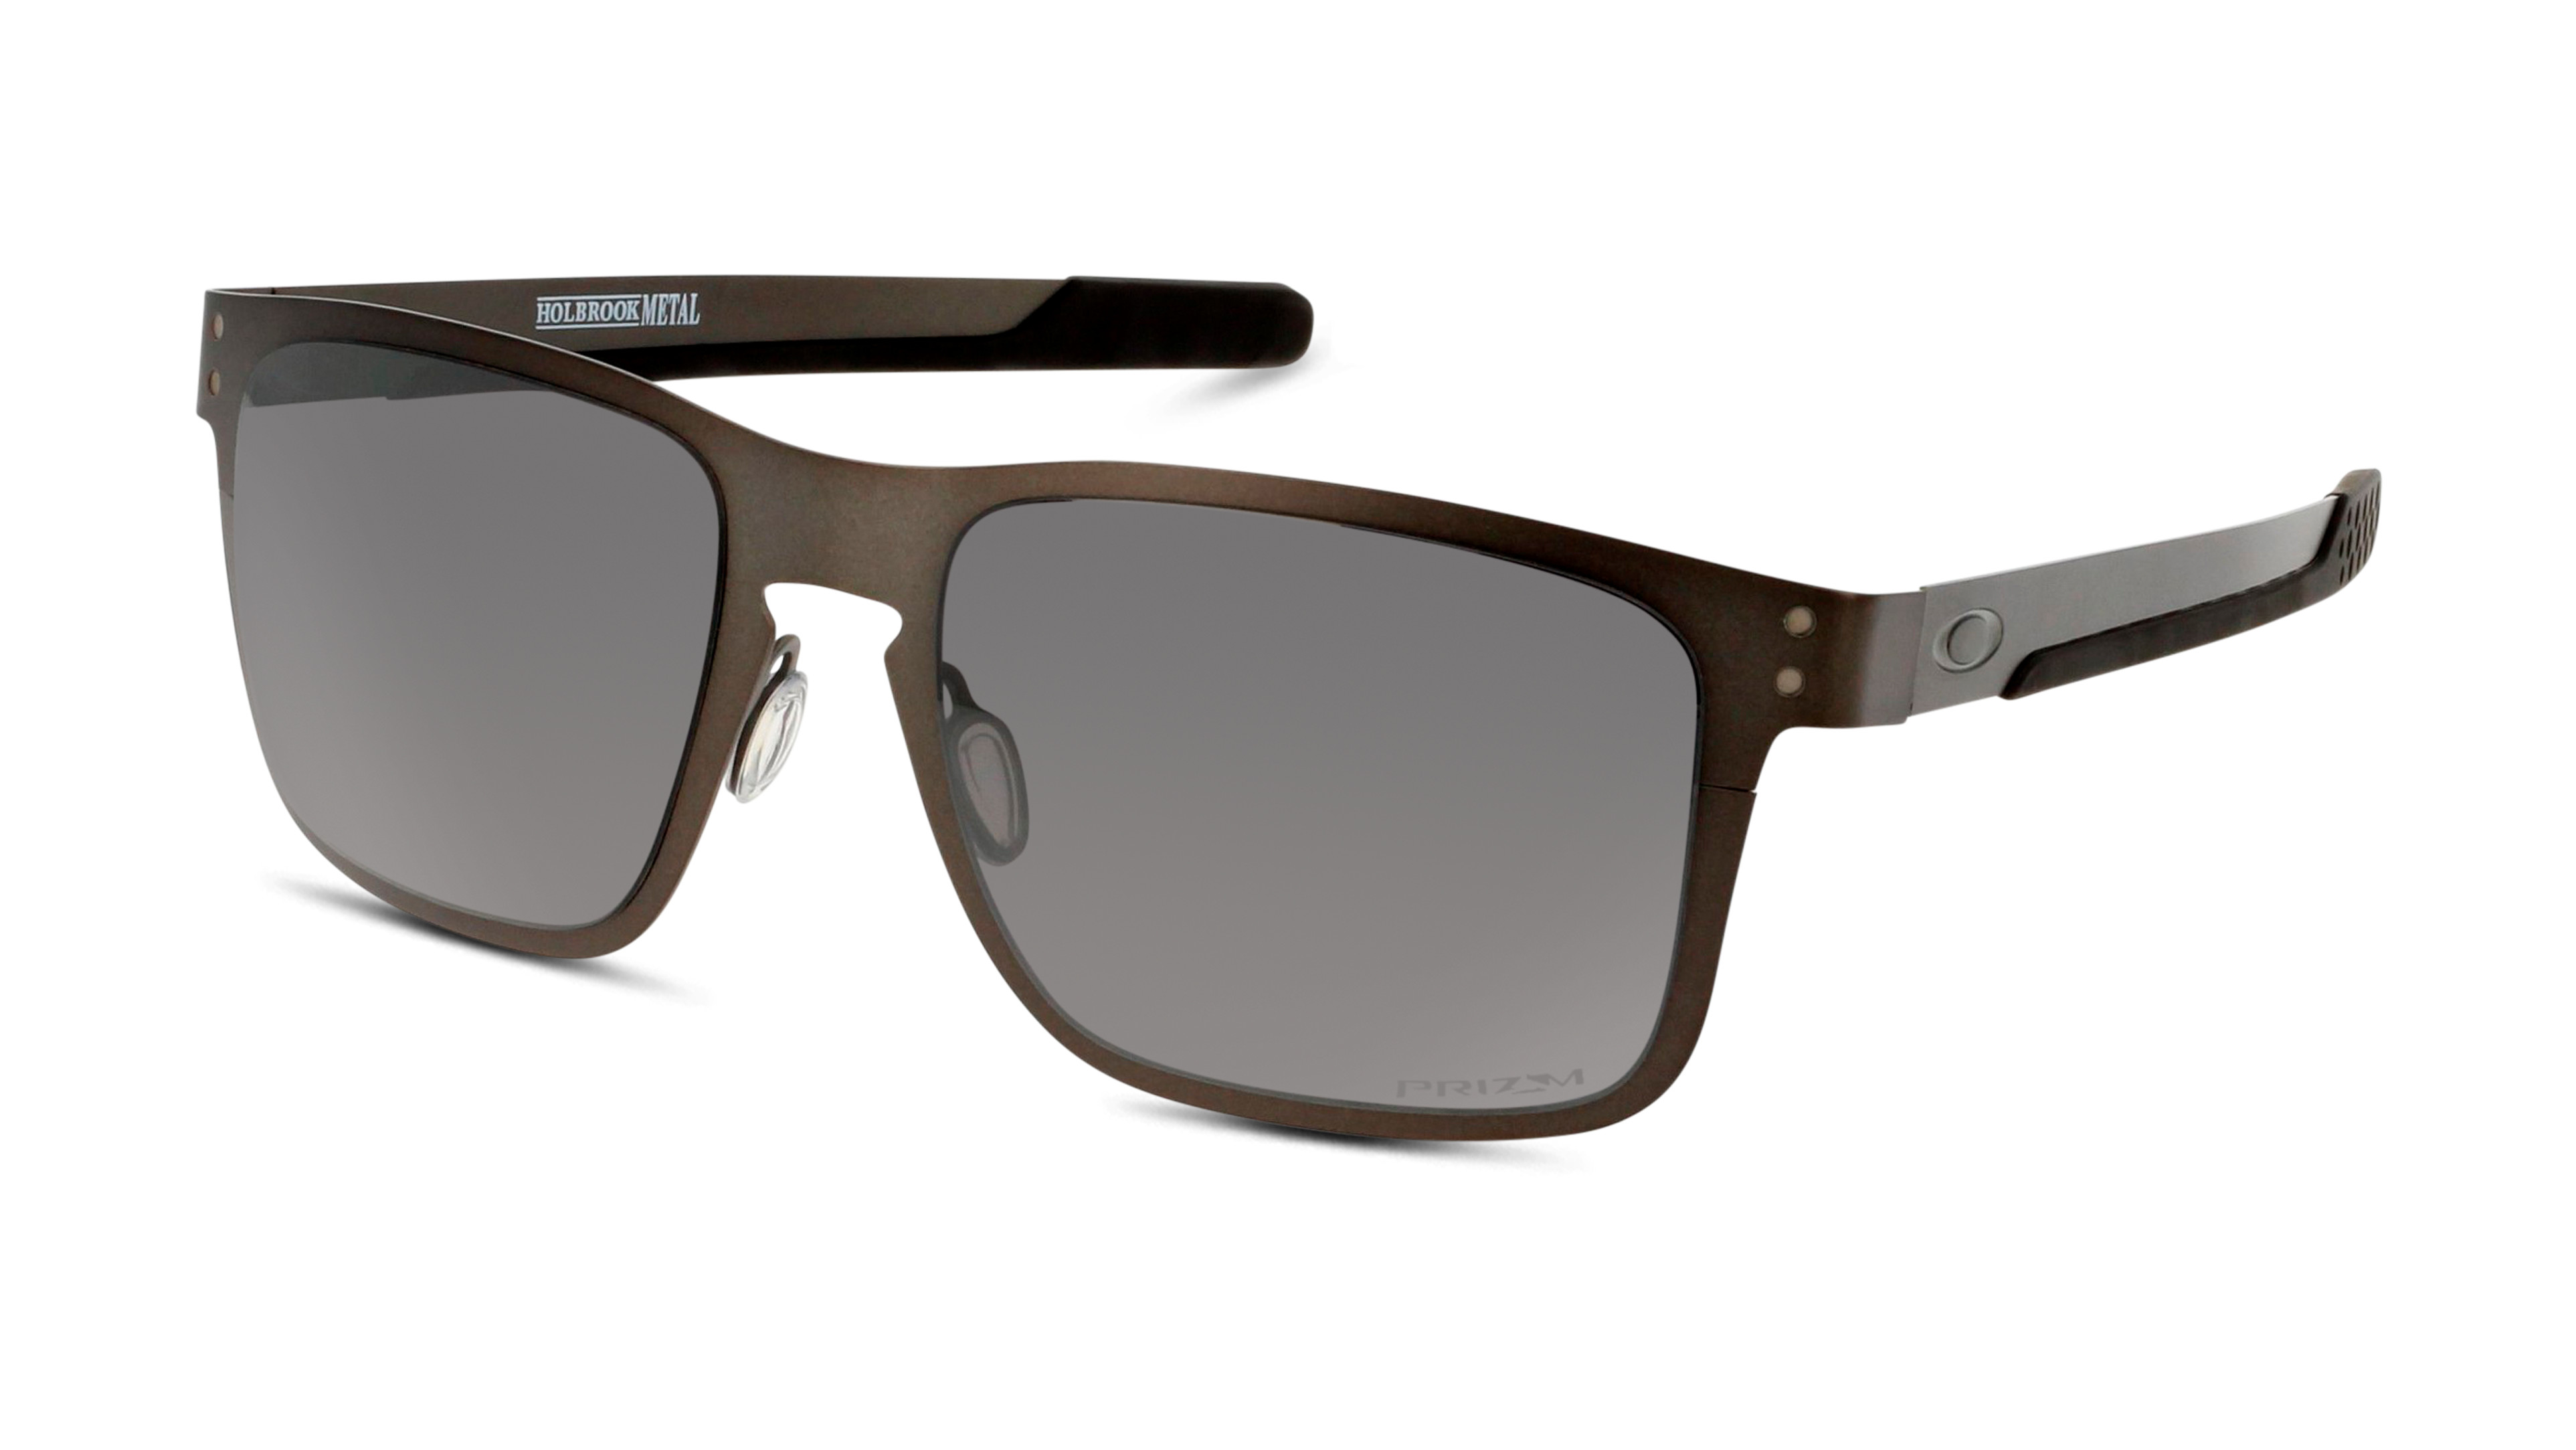 [products.image.angle_left01] Oakley Holbrook Metal 0OO4123 412306 Sonnenbrille